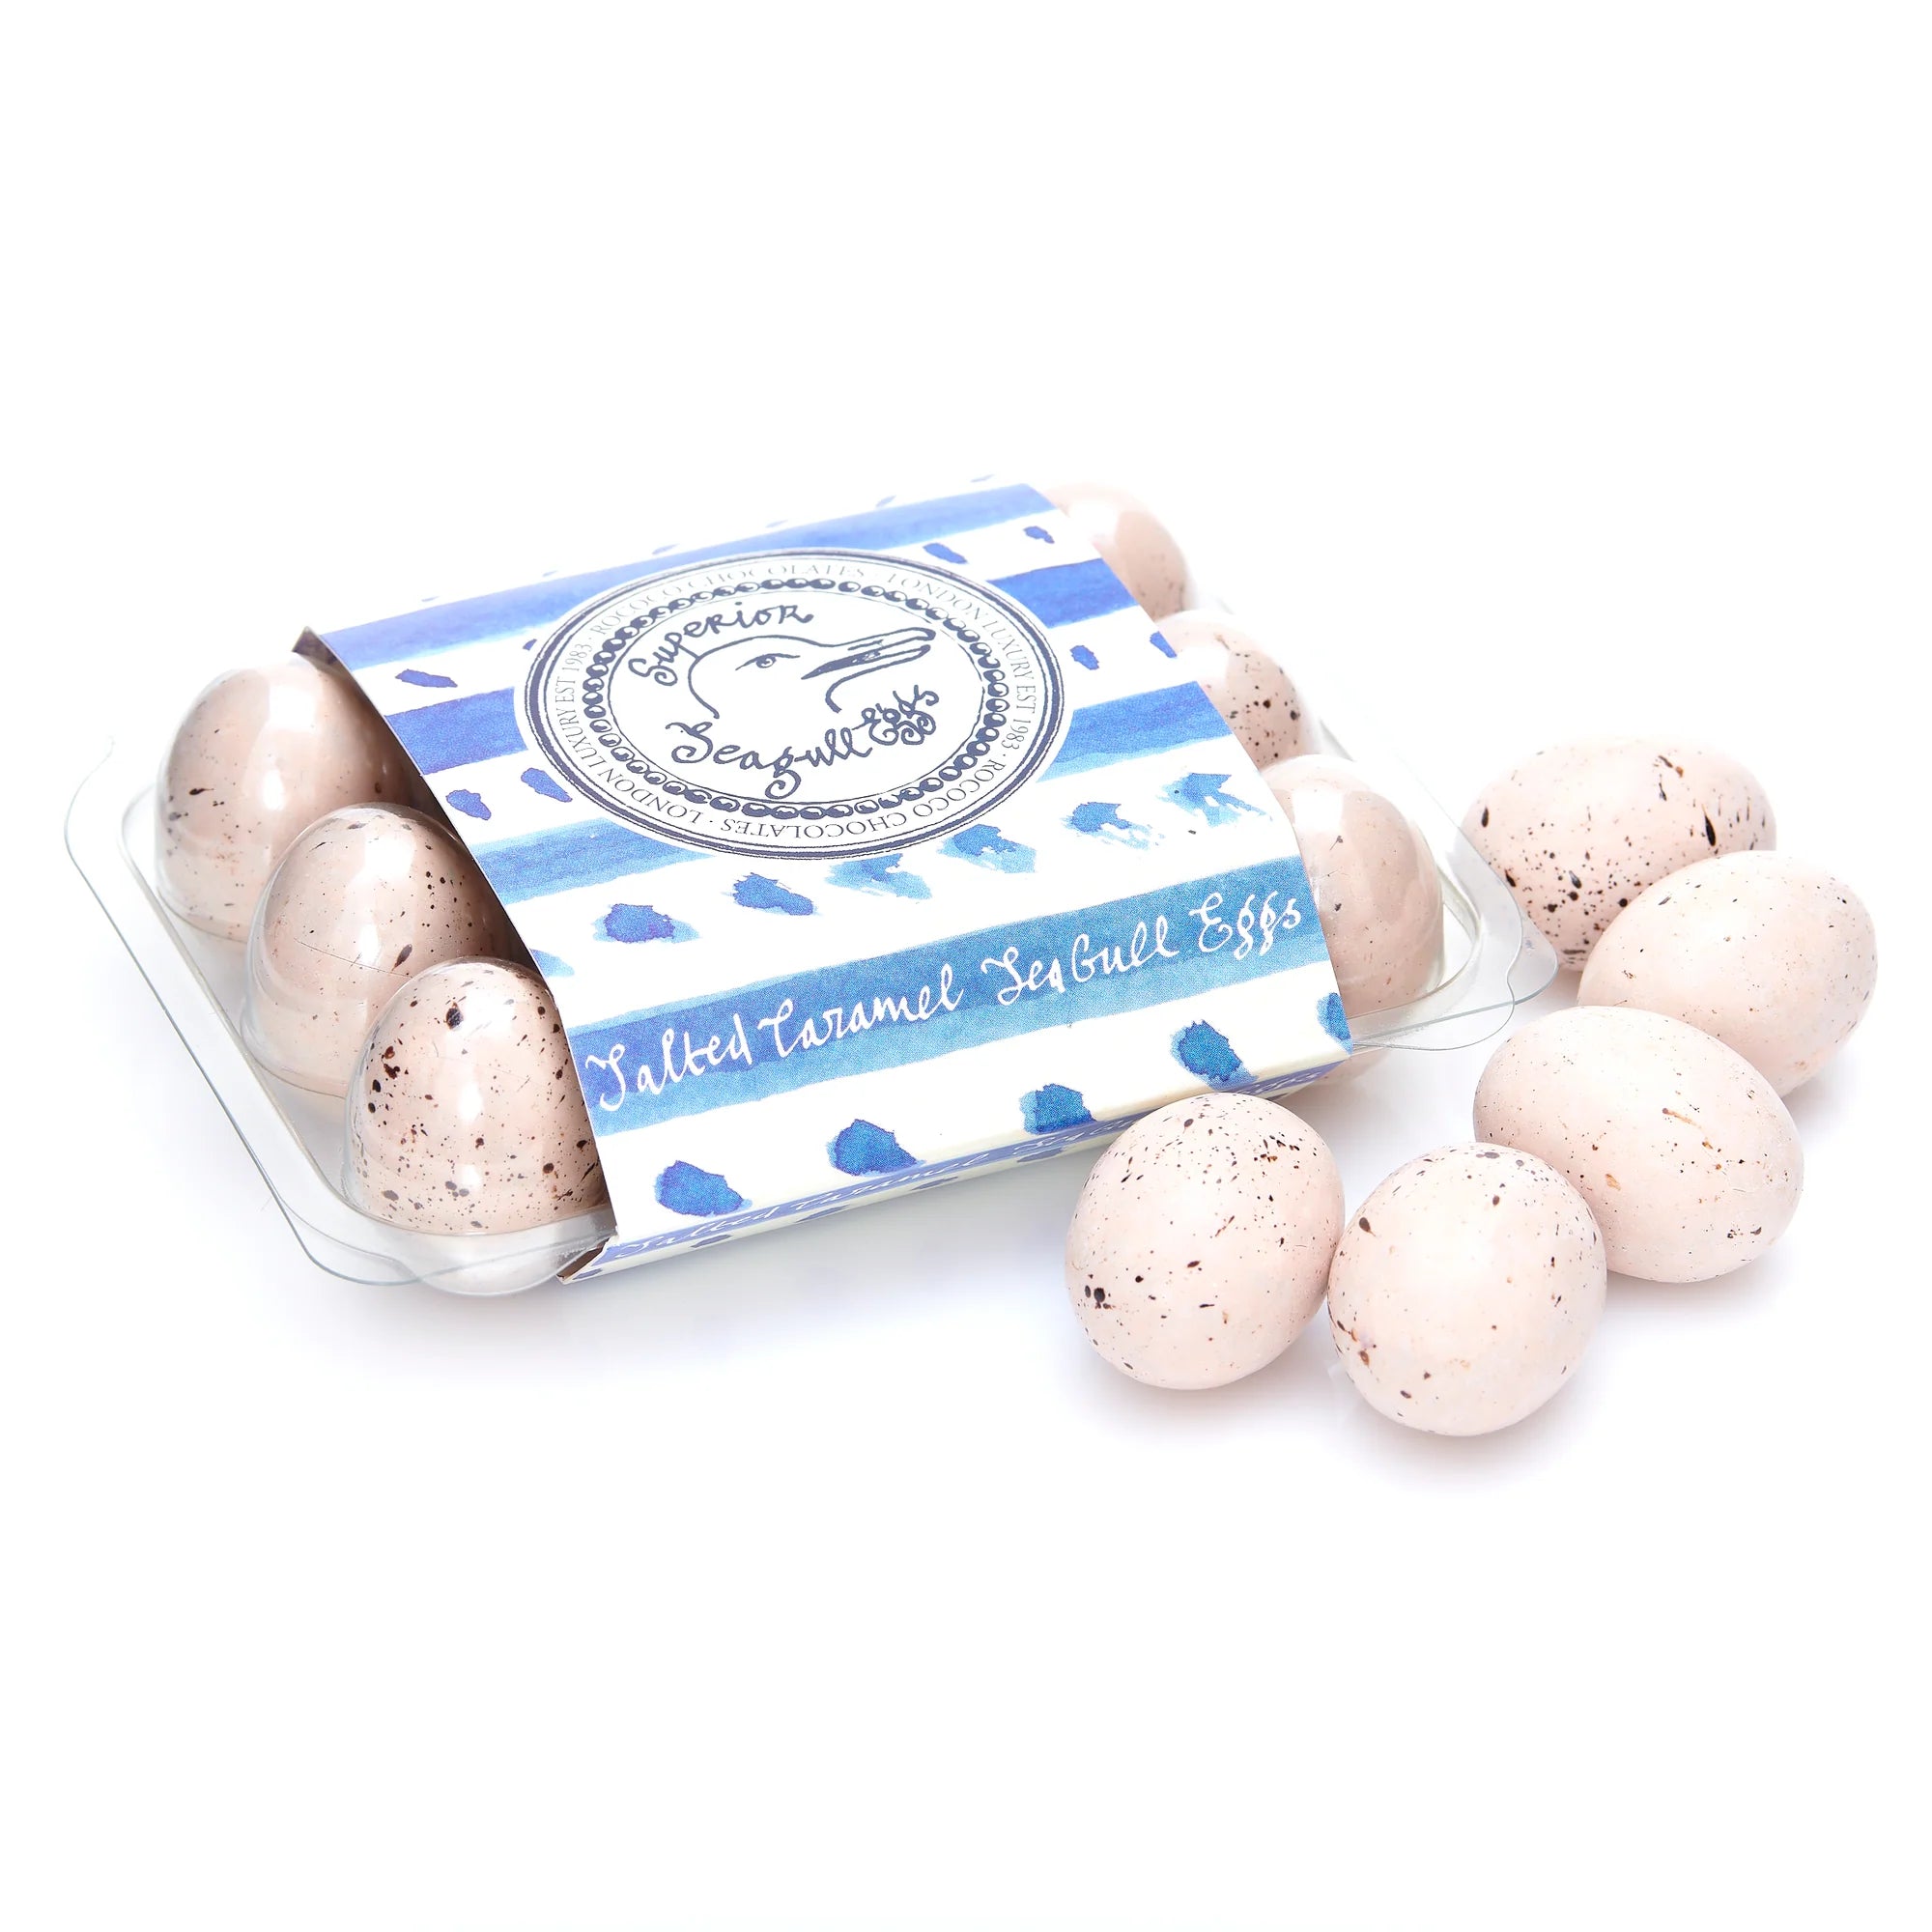 Salted Caramel Seagull Eggs Crate